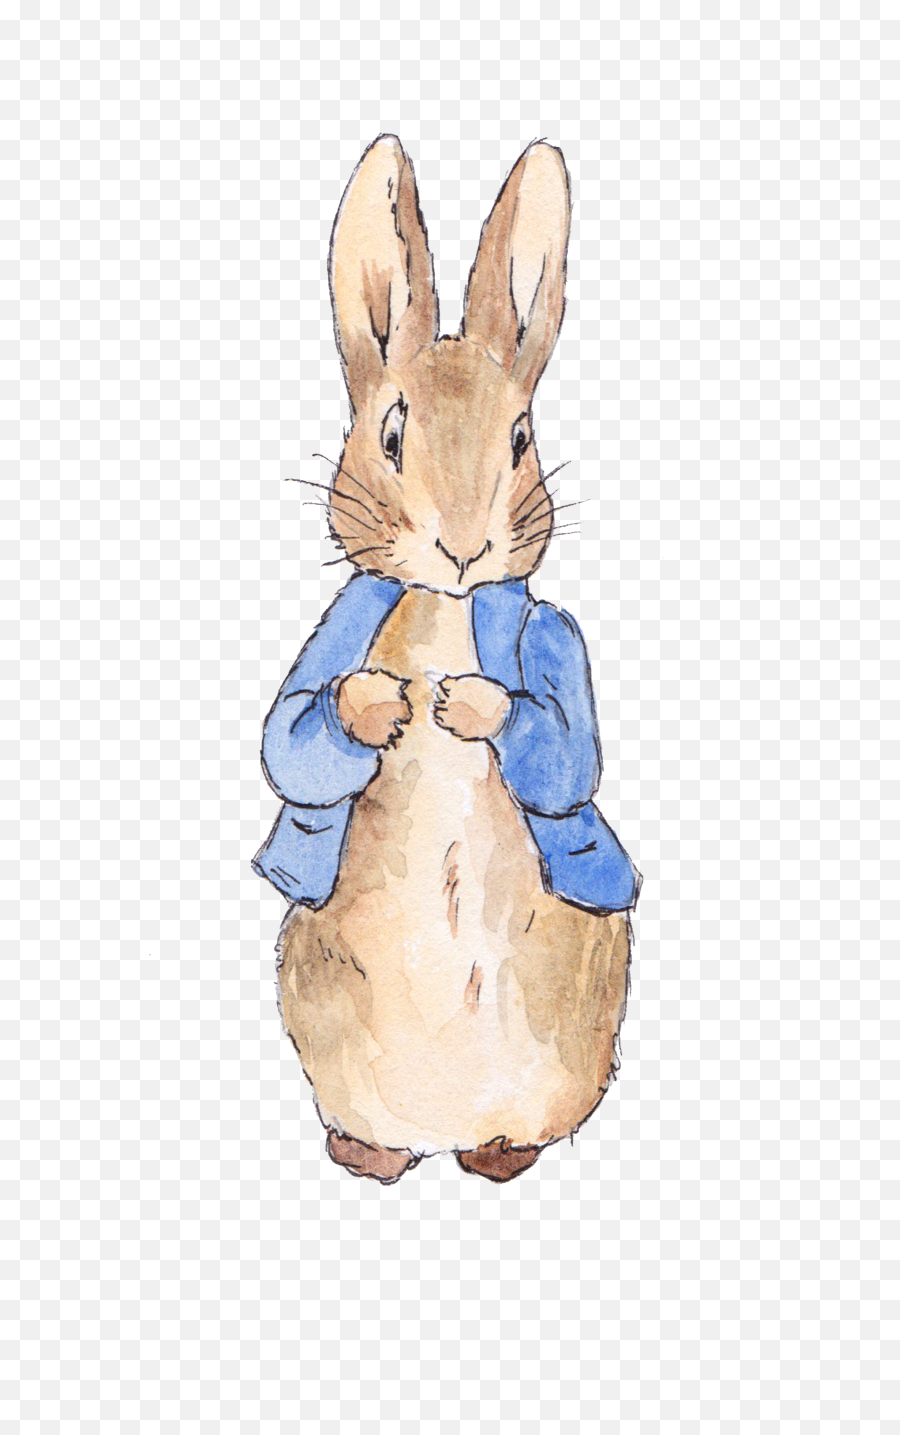 Download Hd Peter Rabbit Watercolour Transparent Png Image - Even The Smallest One Can Change The World,Rabbit Transparent